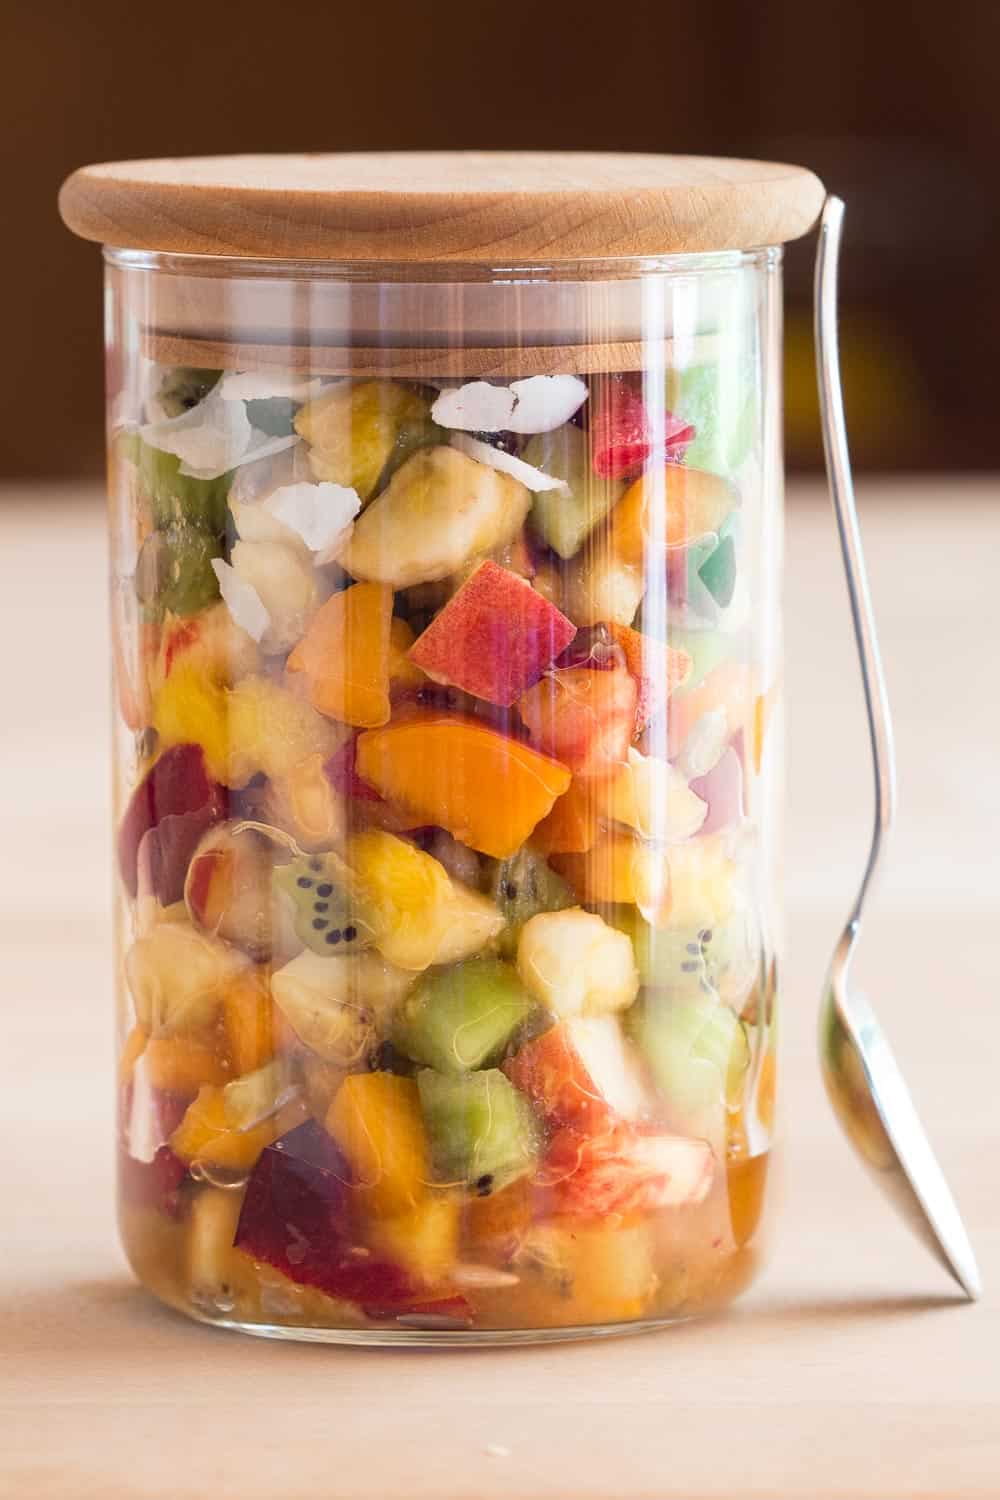 Mango Fruit Salad in a jar with a spoon leaning against it.